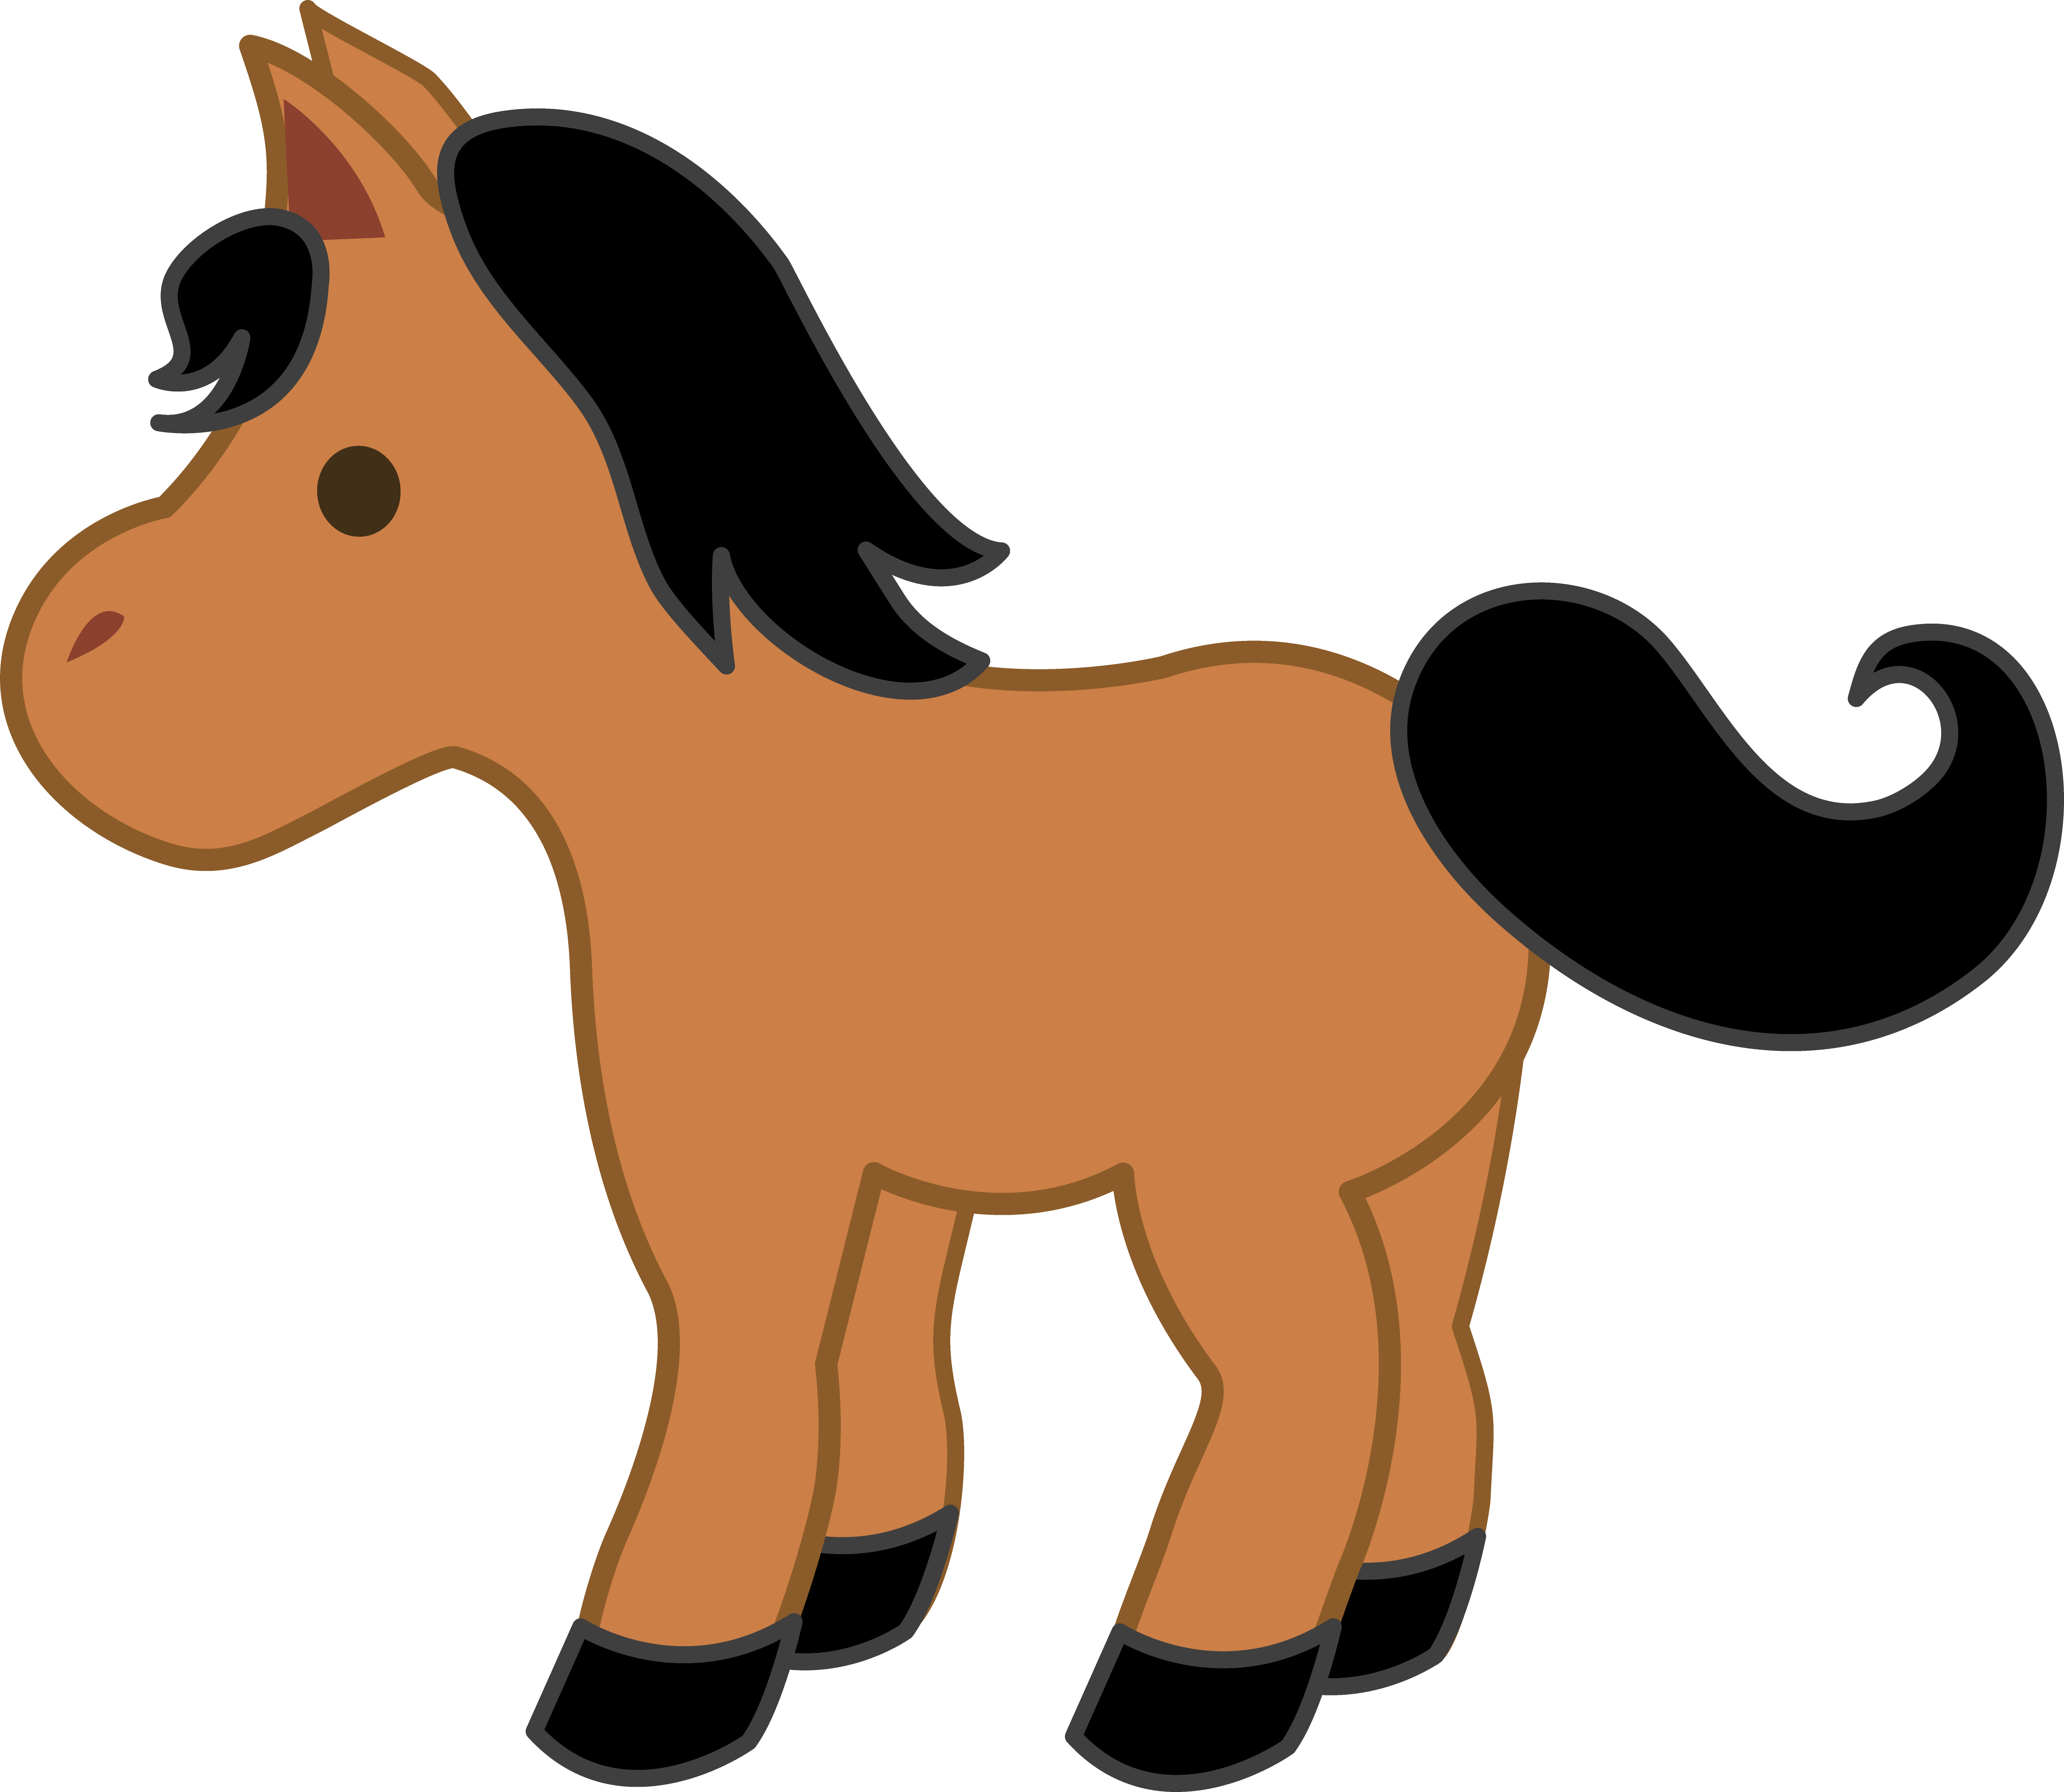 Foal Clipart | Clipart Panda - Free Clipart Images